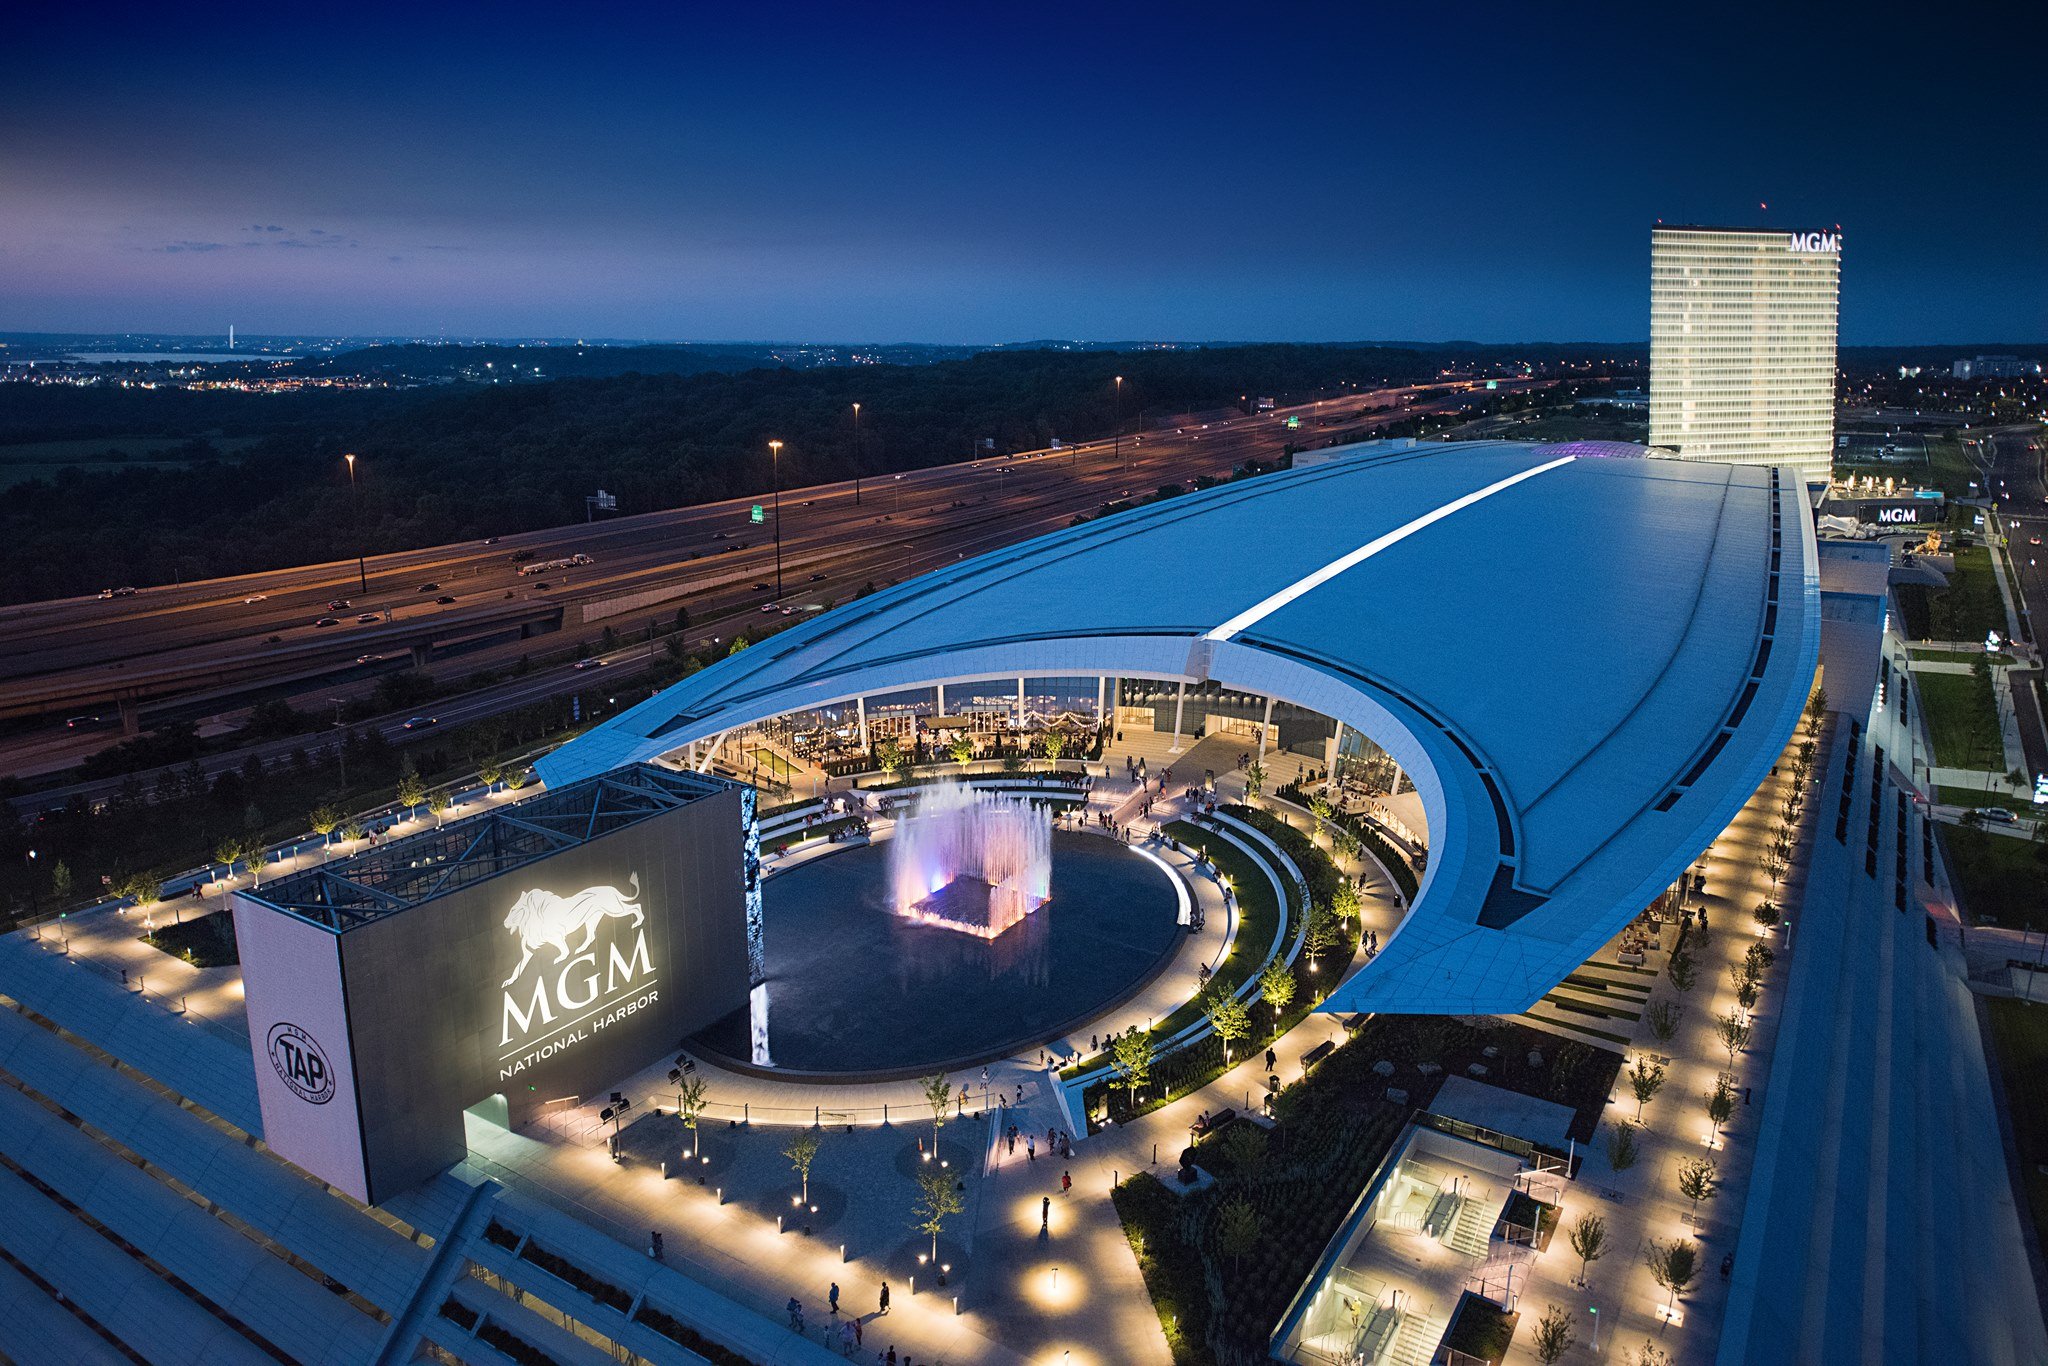 Glitches mgm national harbor propels md casino revenue Rides infinity slots twitter